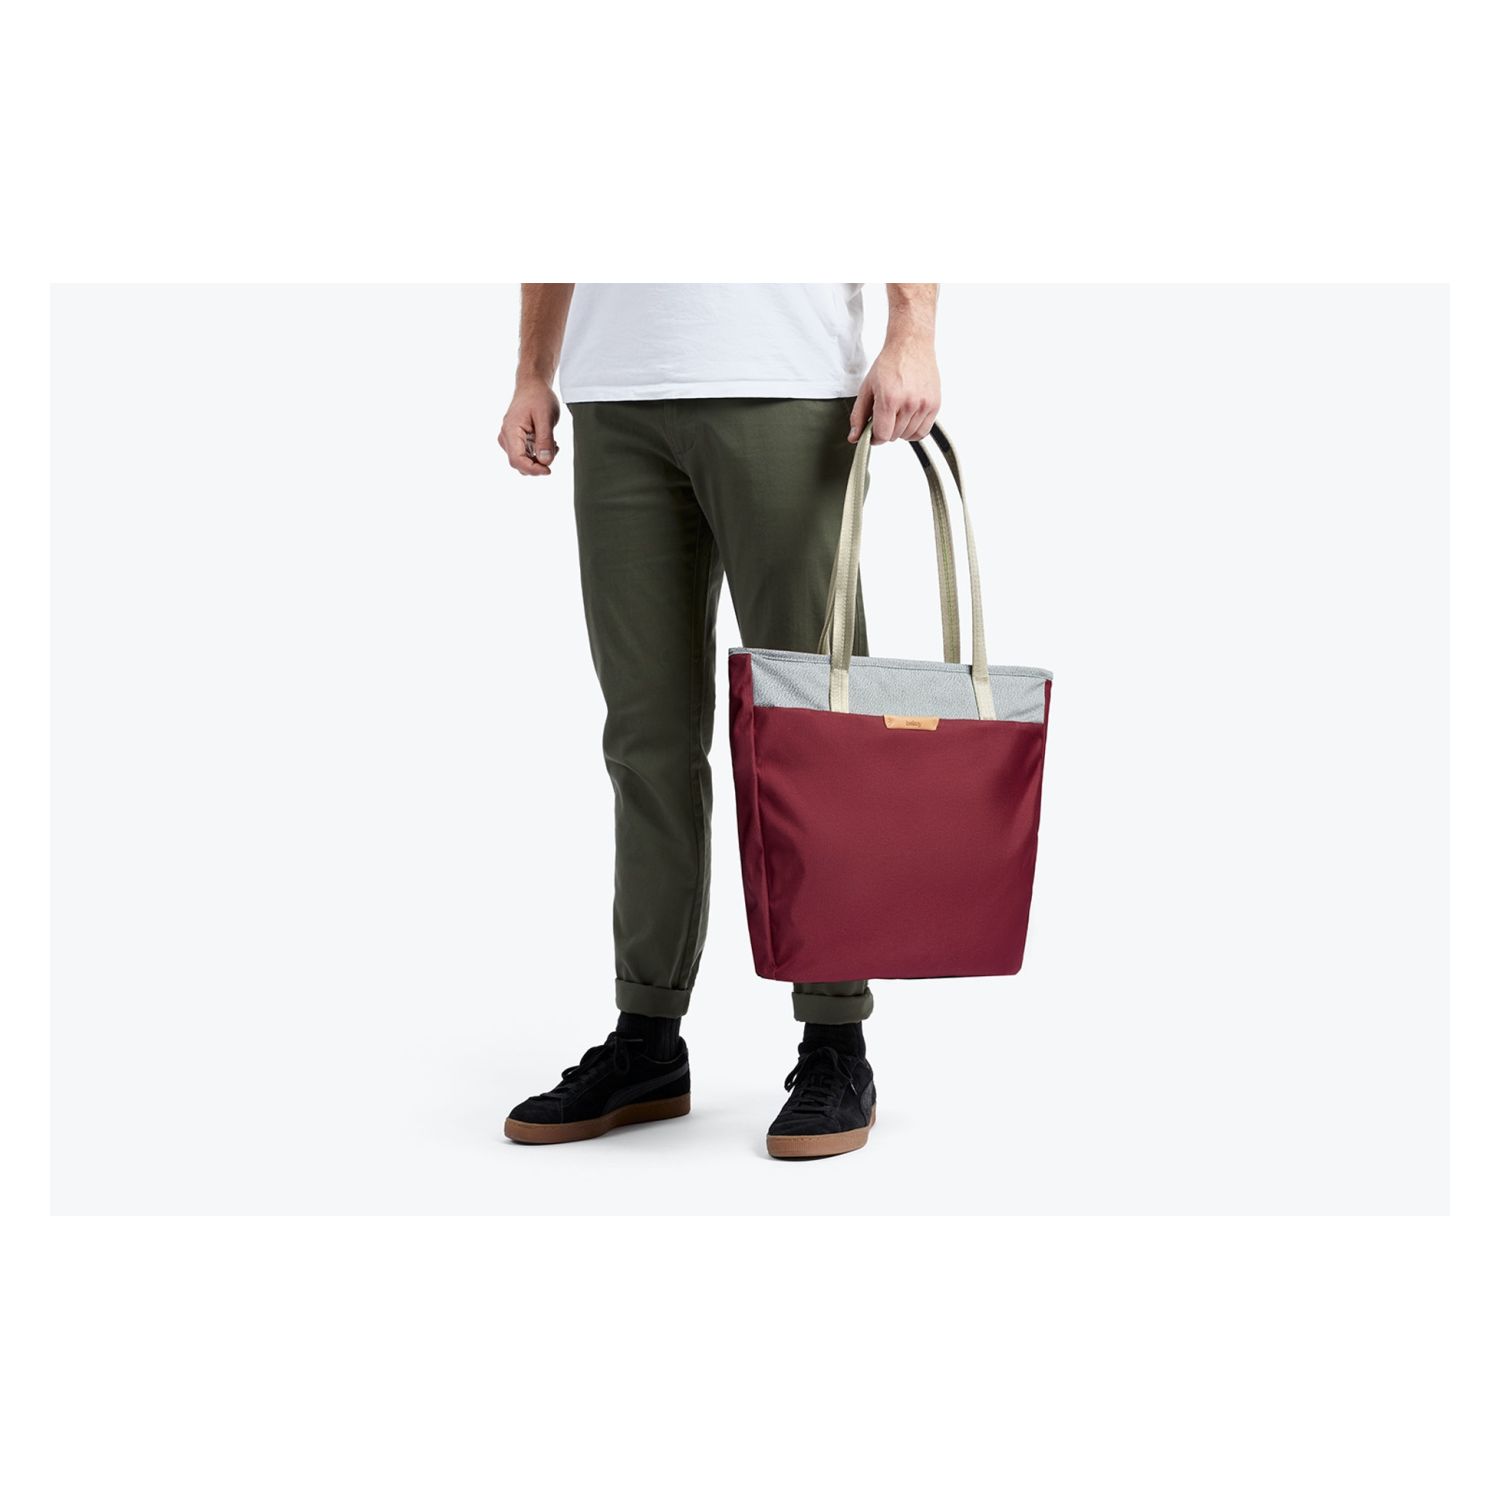 Buy Bellroy Tokyo Tote - Neon Cabernet in Singapore & Malaysia - The Planet Traveller